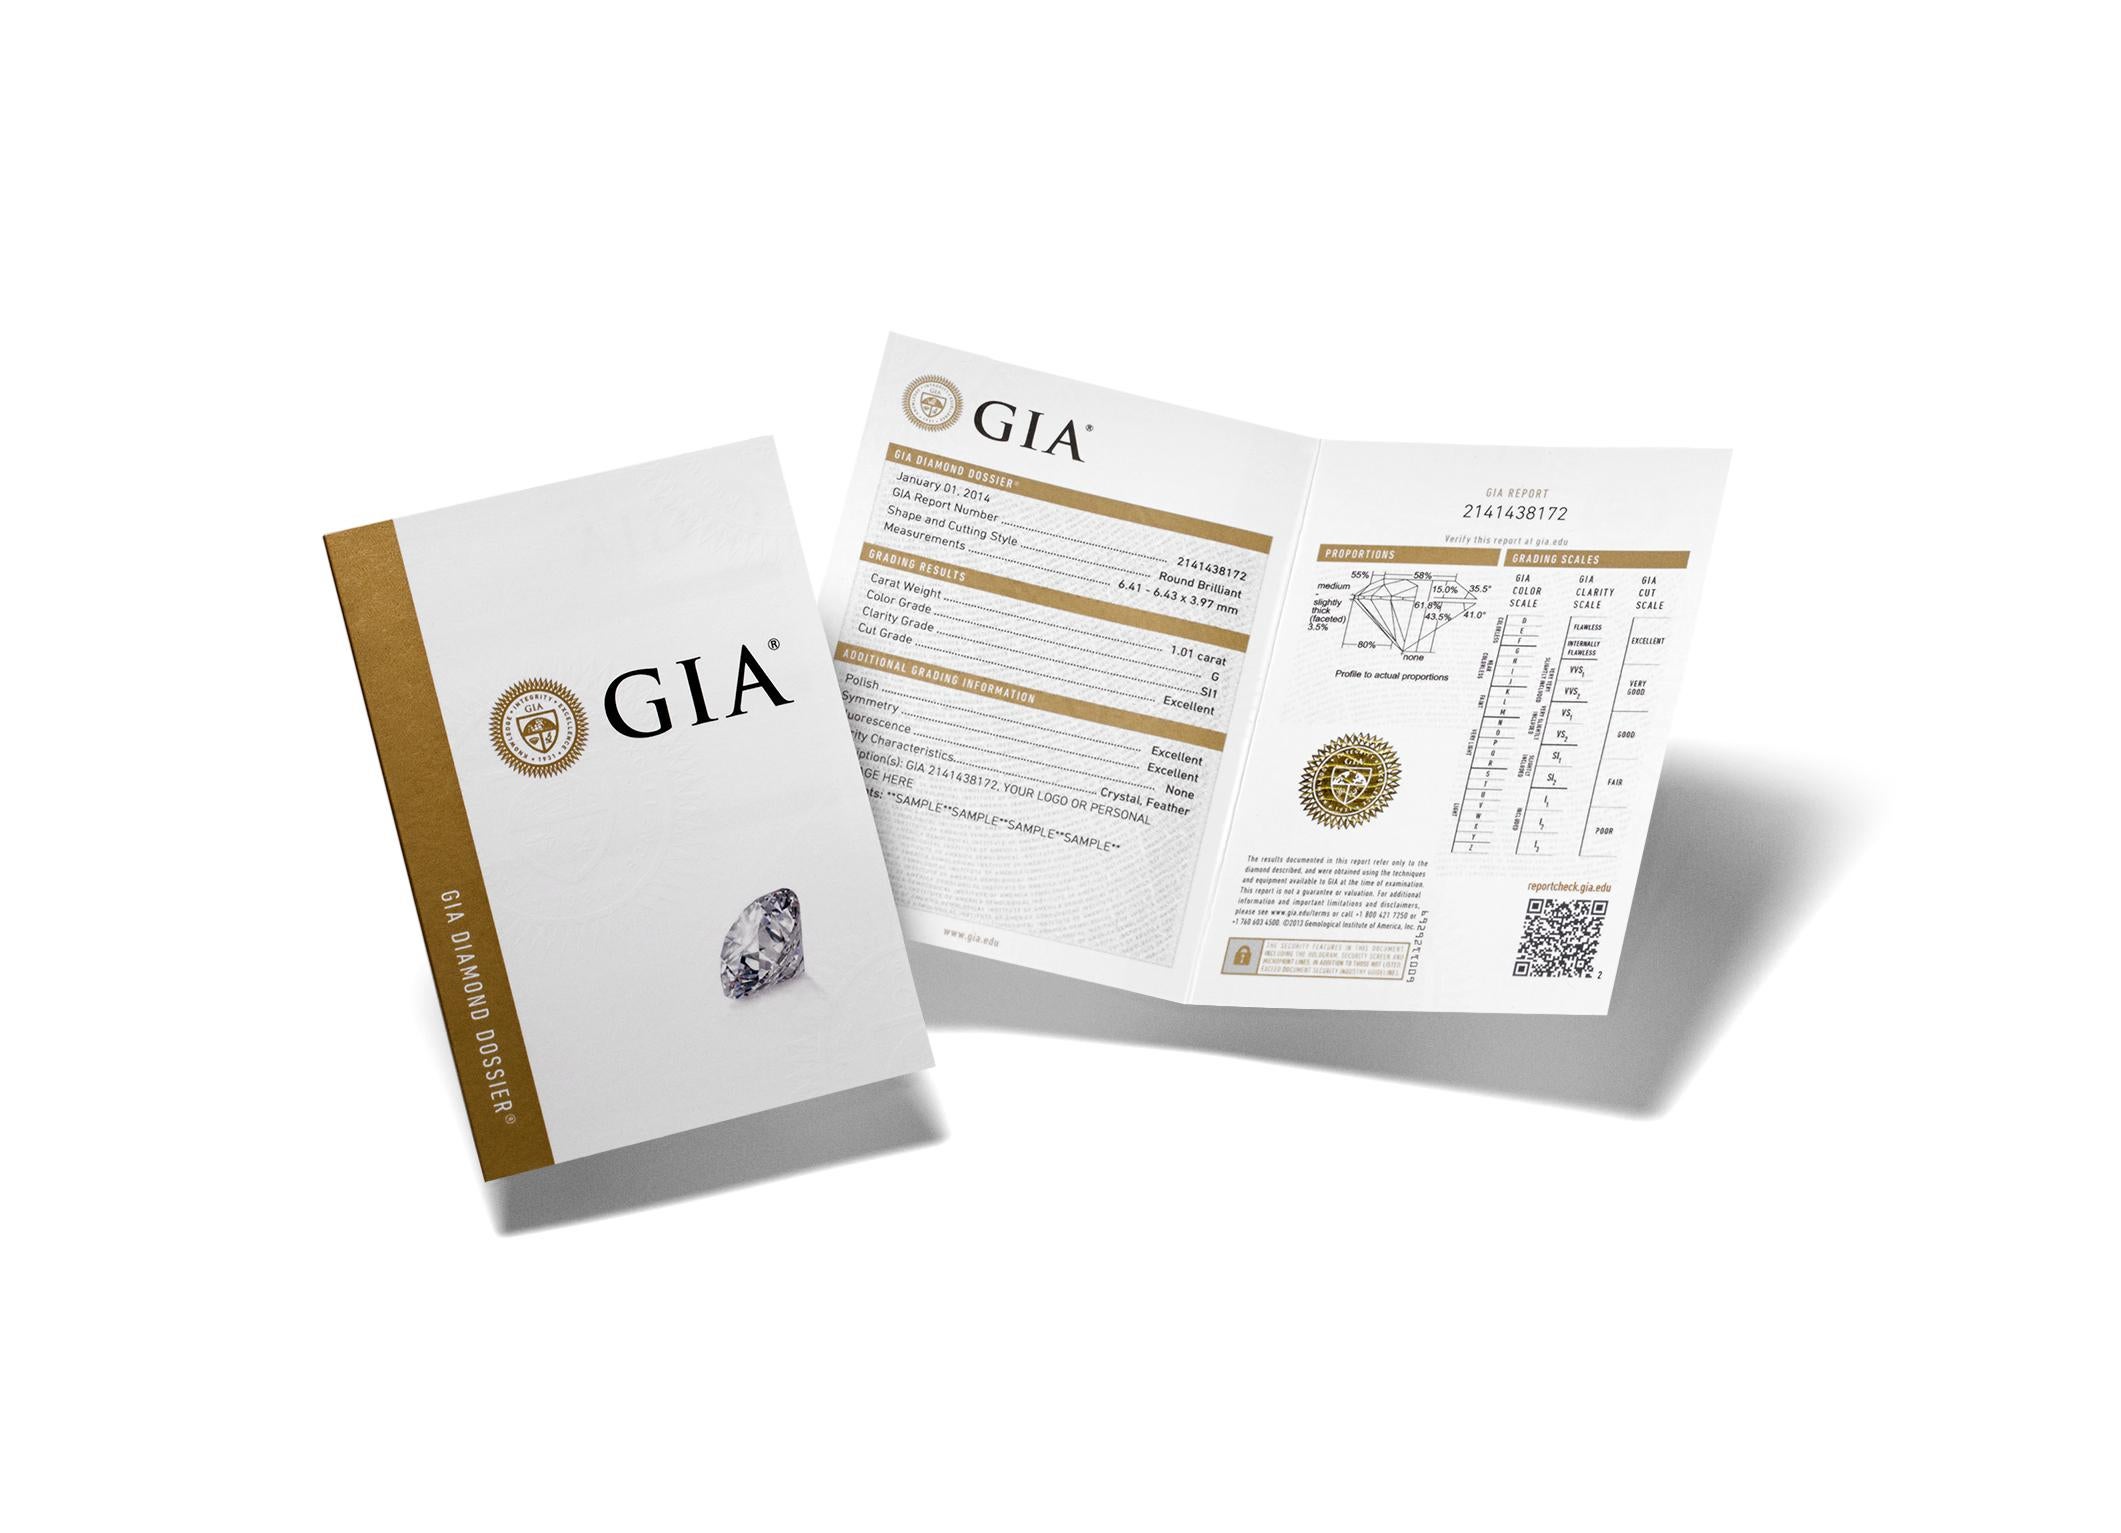 GIA Certified 0.50 Carat, F/VVS1, Brilliant Cut, Excellent Natural Diamond

Perfect Brilliants for perfect gifts.

5 C's:

Certificate: GIA
Carat: 0.50ct
Color: F
Clarity: VVS1(Very Very Slightly Included)
Cut: Excellent

Polish: Excellent
Symmetry: